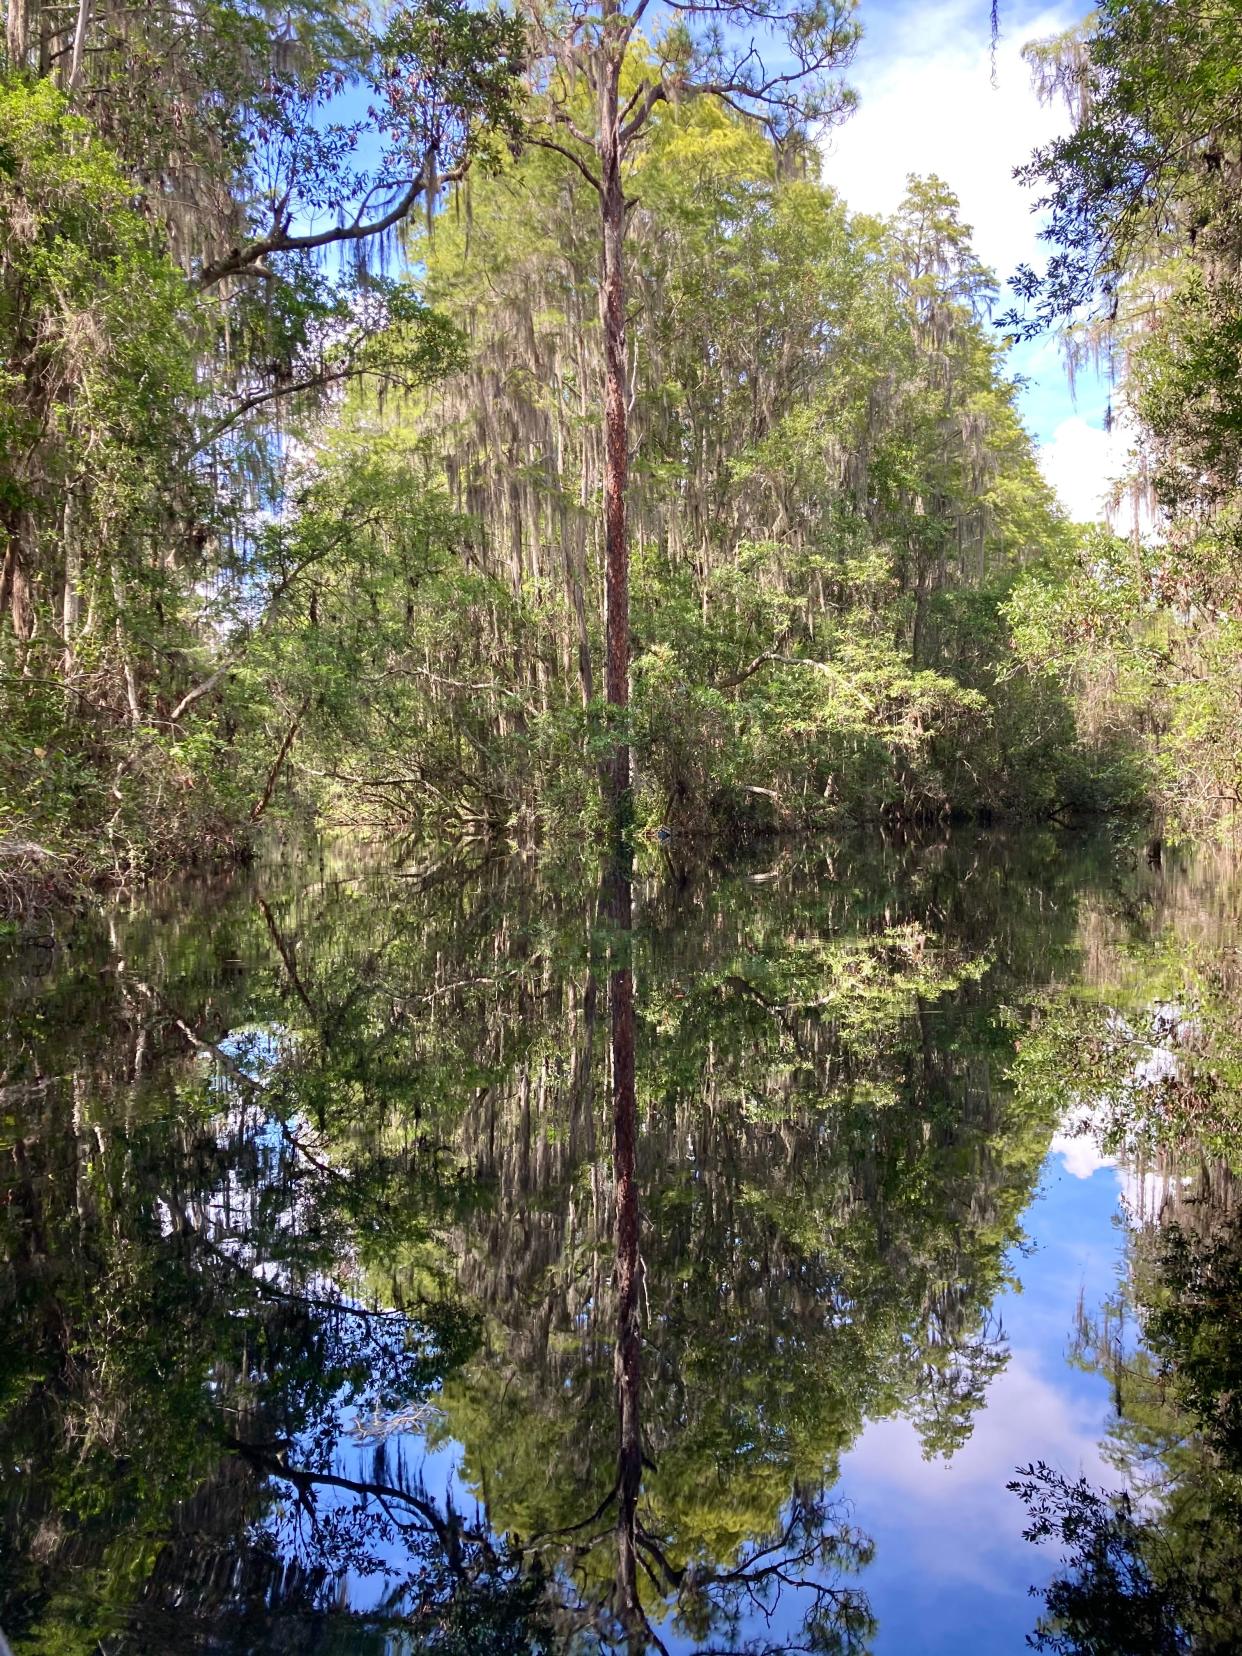 FILE: Junction of main canal and blue trail at Okefenokee Swamp. The Refuge is being considered for UNESCO World Heritage Site designation for its biological processes, wildlife diversity and its natural beauty.